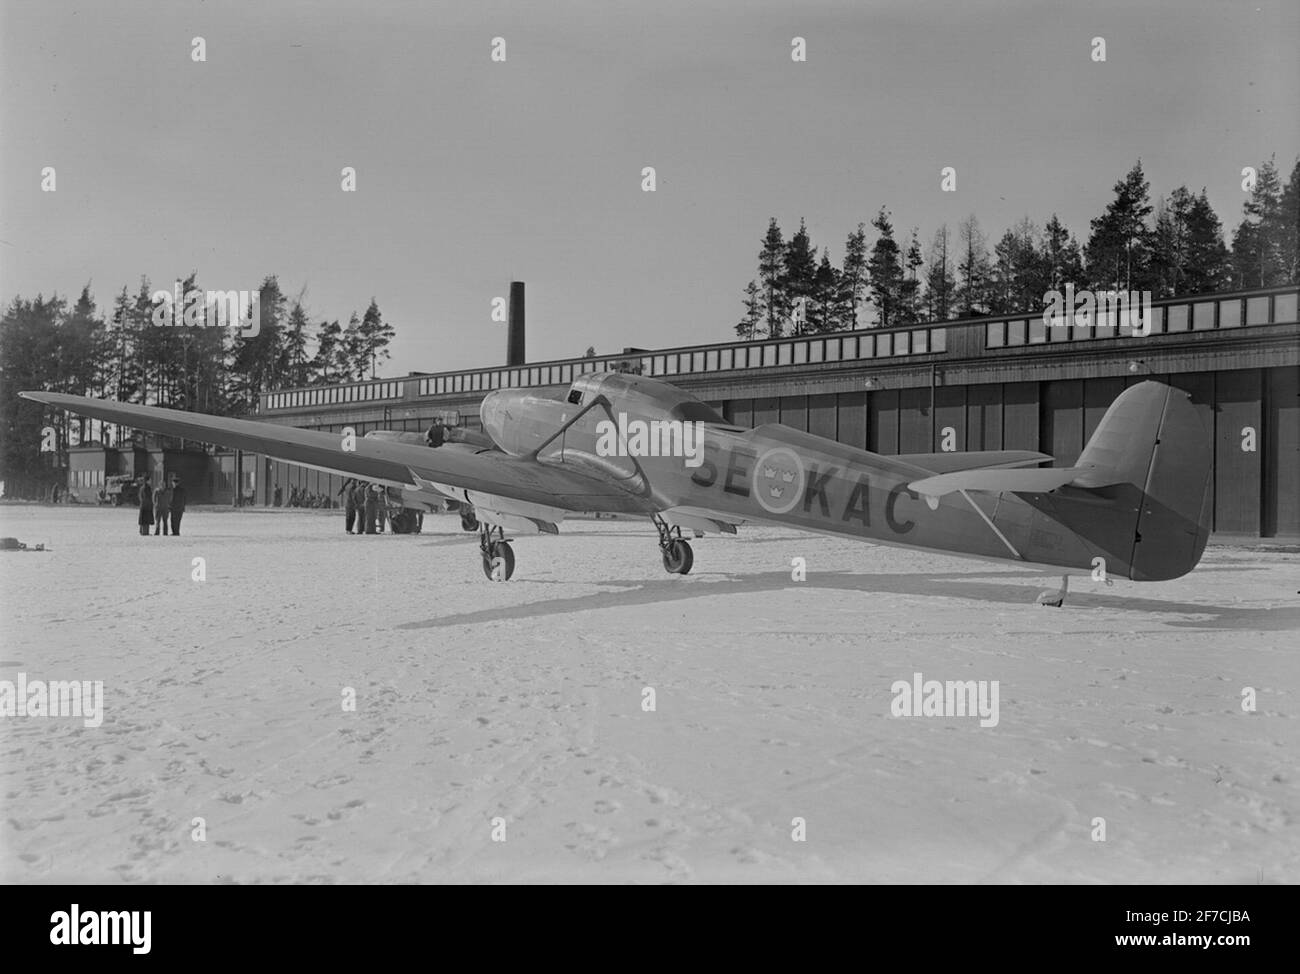 Pharmacies Airplane Type P 6, 1944  The map of the map P 6 with registration designation SE-KAC, winter time. The aircraft seen obliquely from the side. Building in the background. Stock Photo